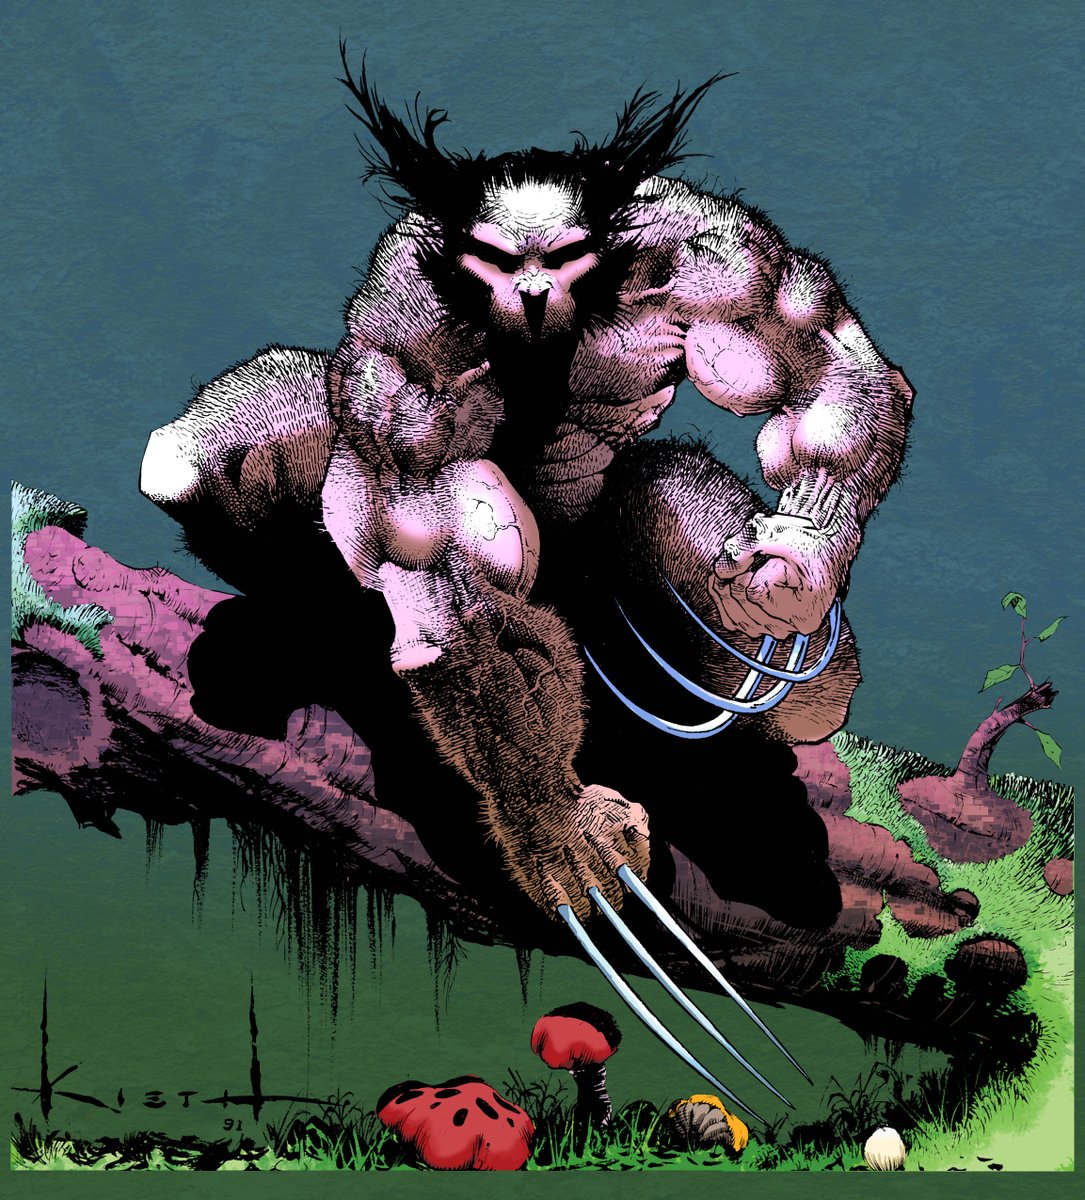 Went back to an older @ColorJams. Sam Kieth on  Wolverine with my colors #colorjams
#coloristjam